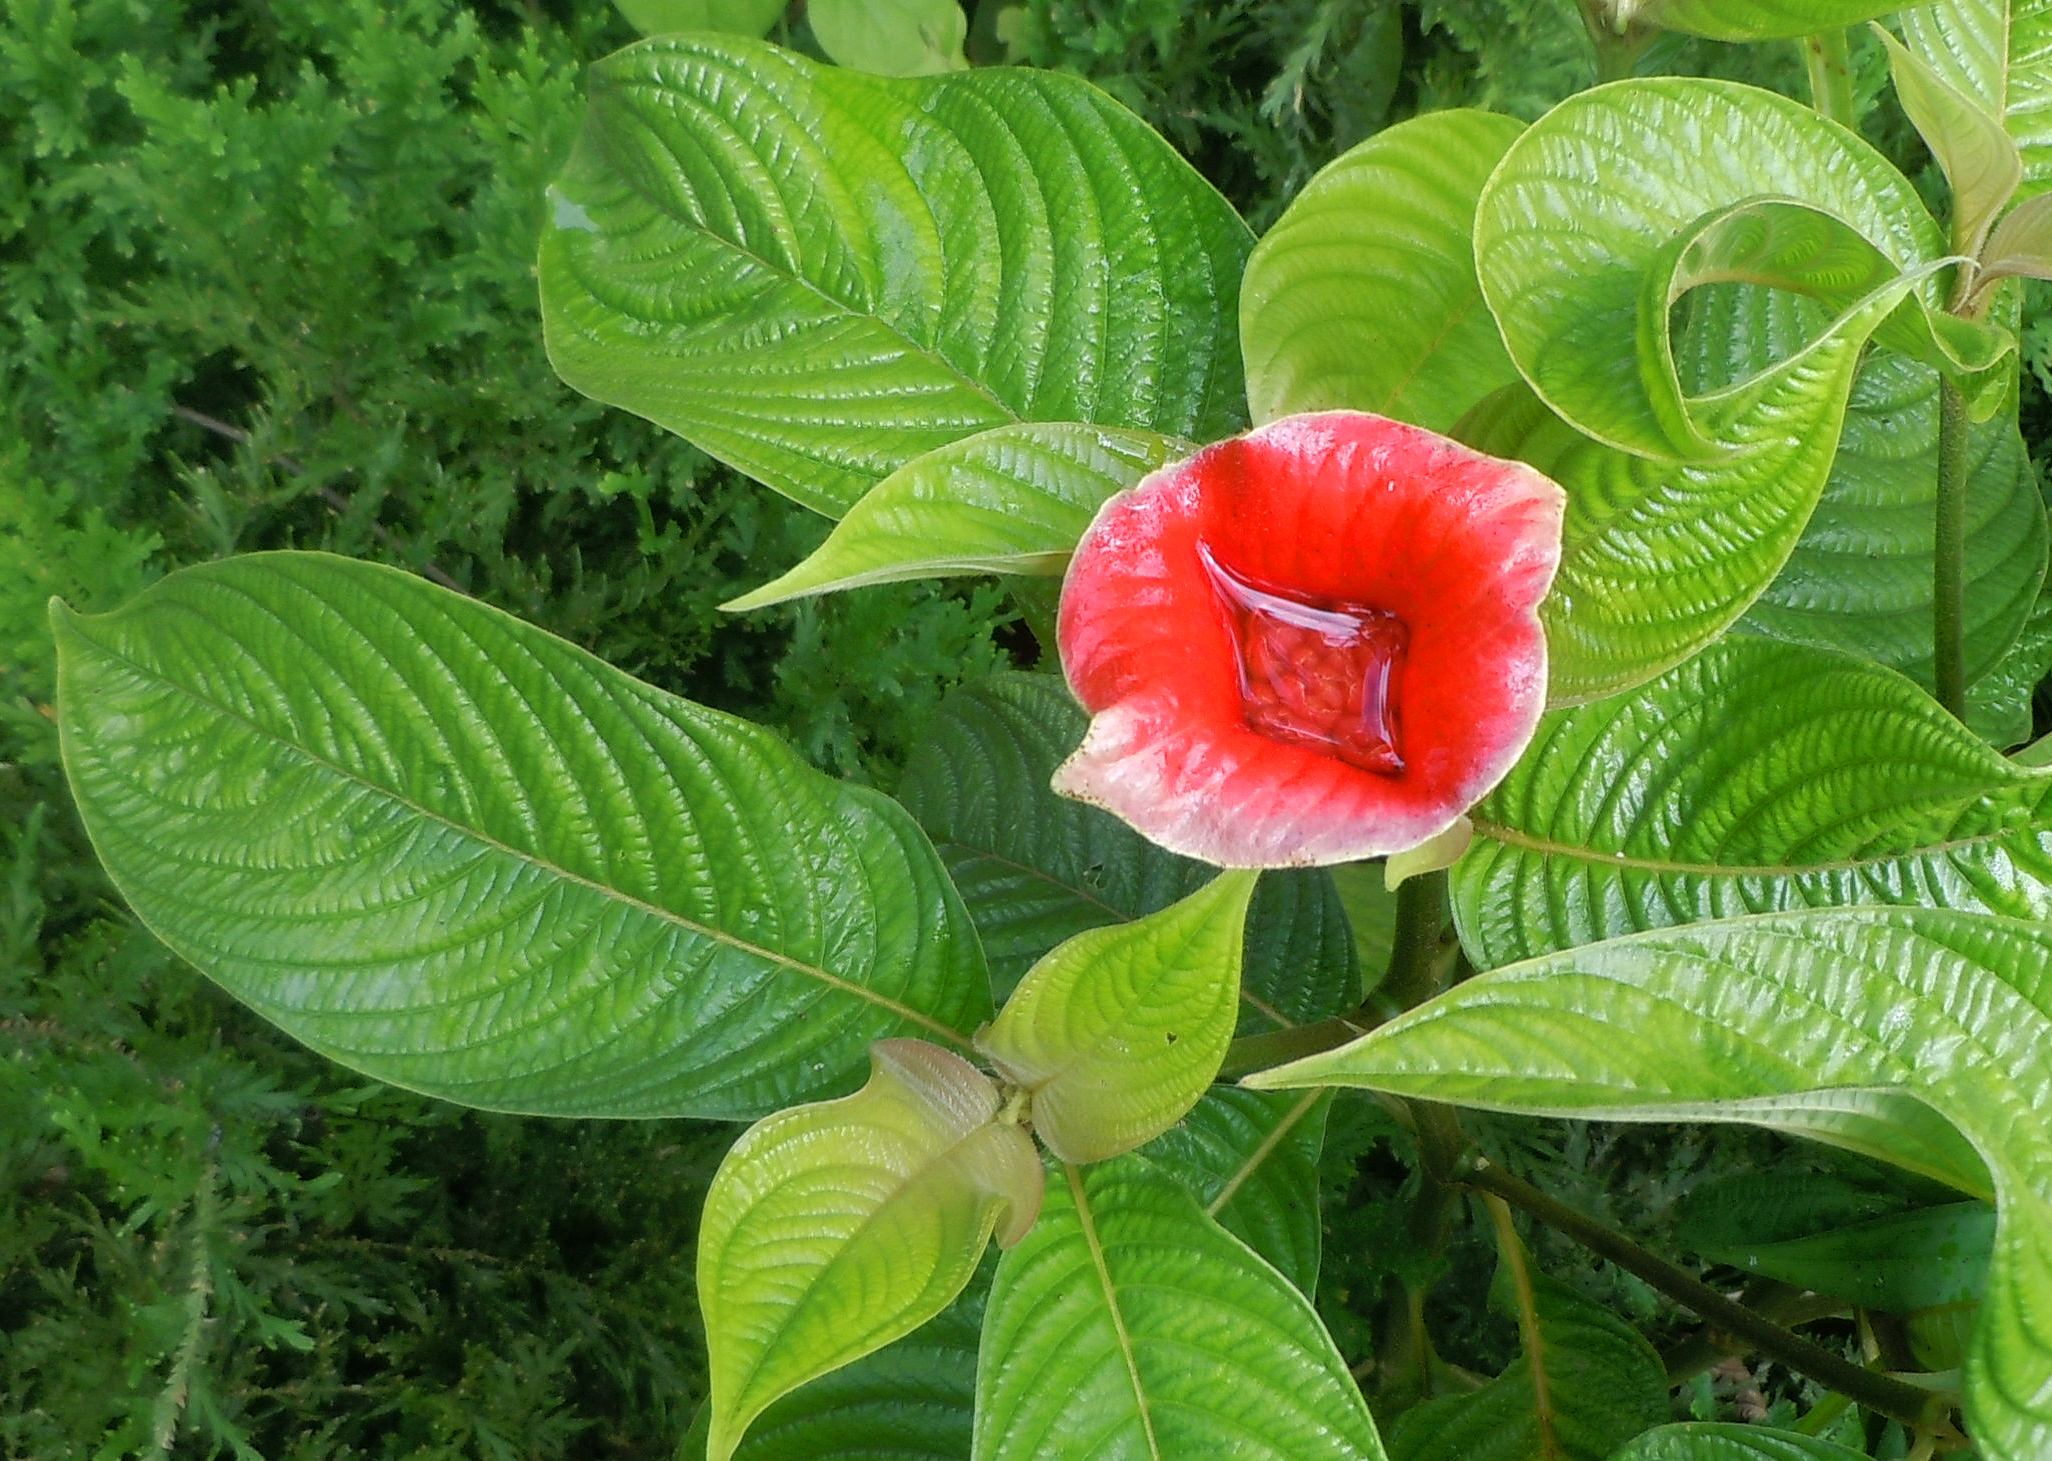 http://amazonecology.files.wordpress.com/2013/10/red-lip-plant-with-water.jpg